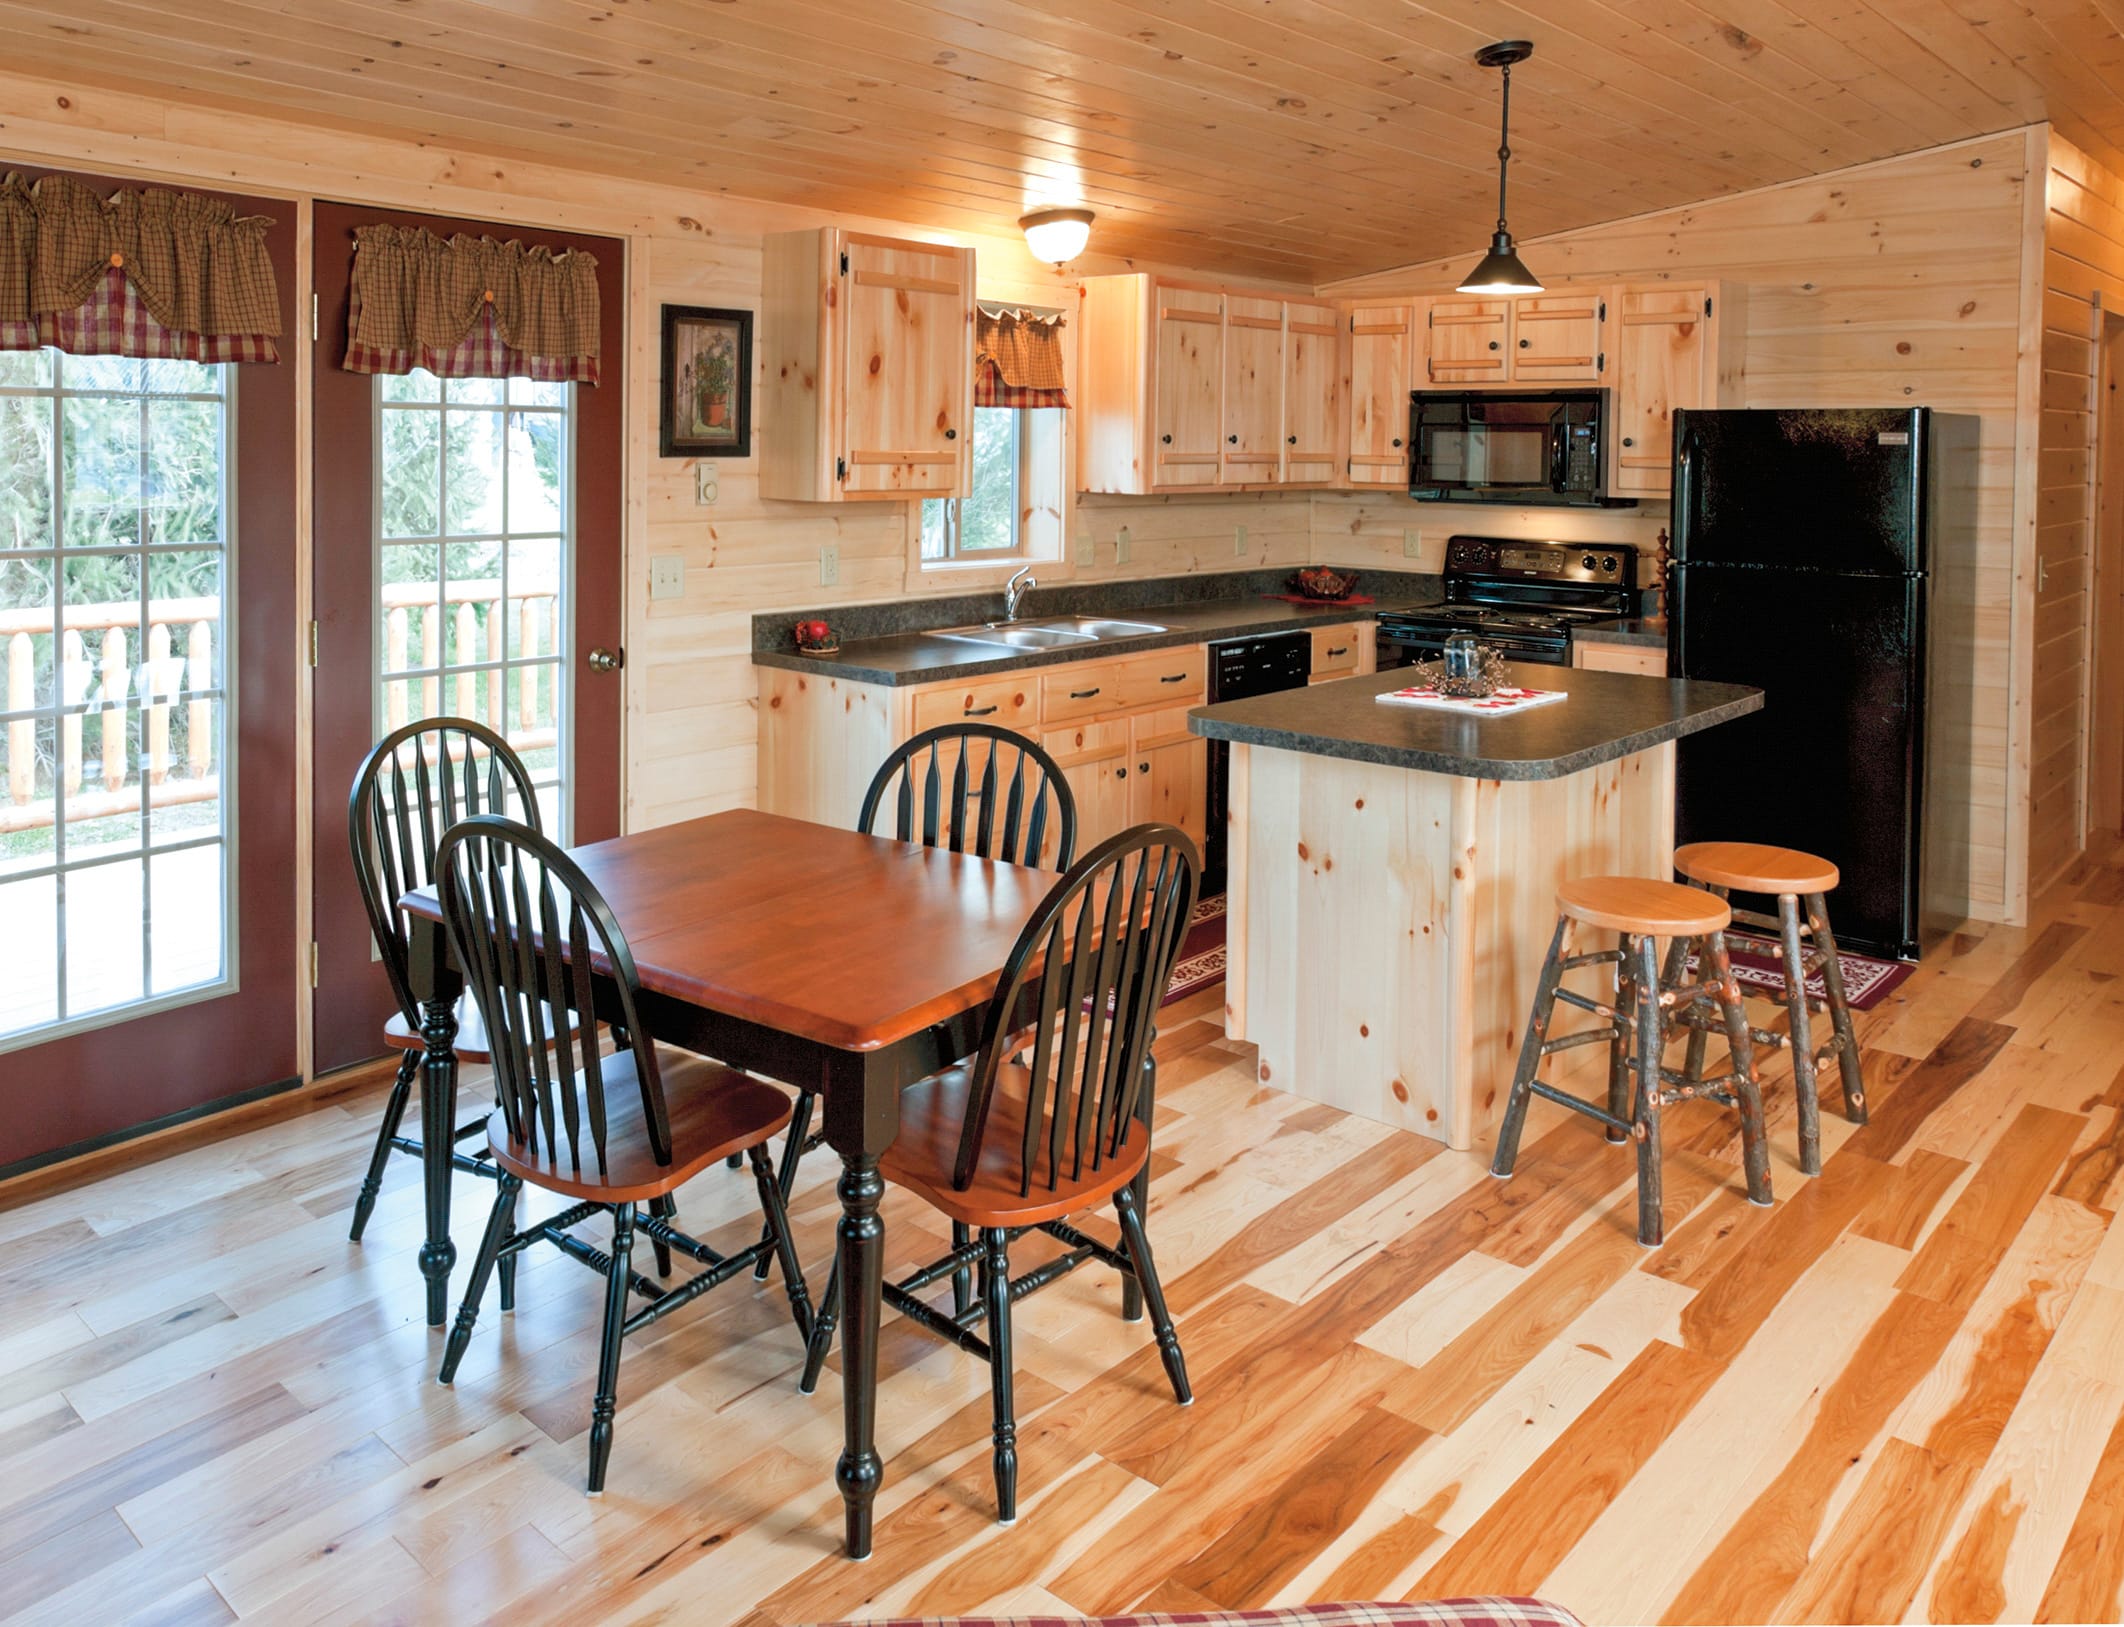 personal space kitchen in hunting cabin